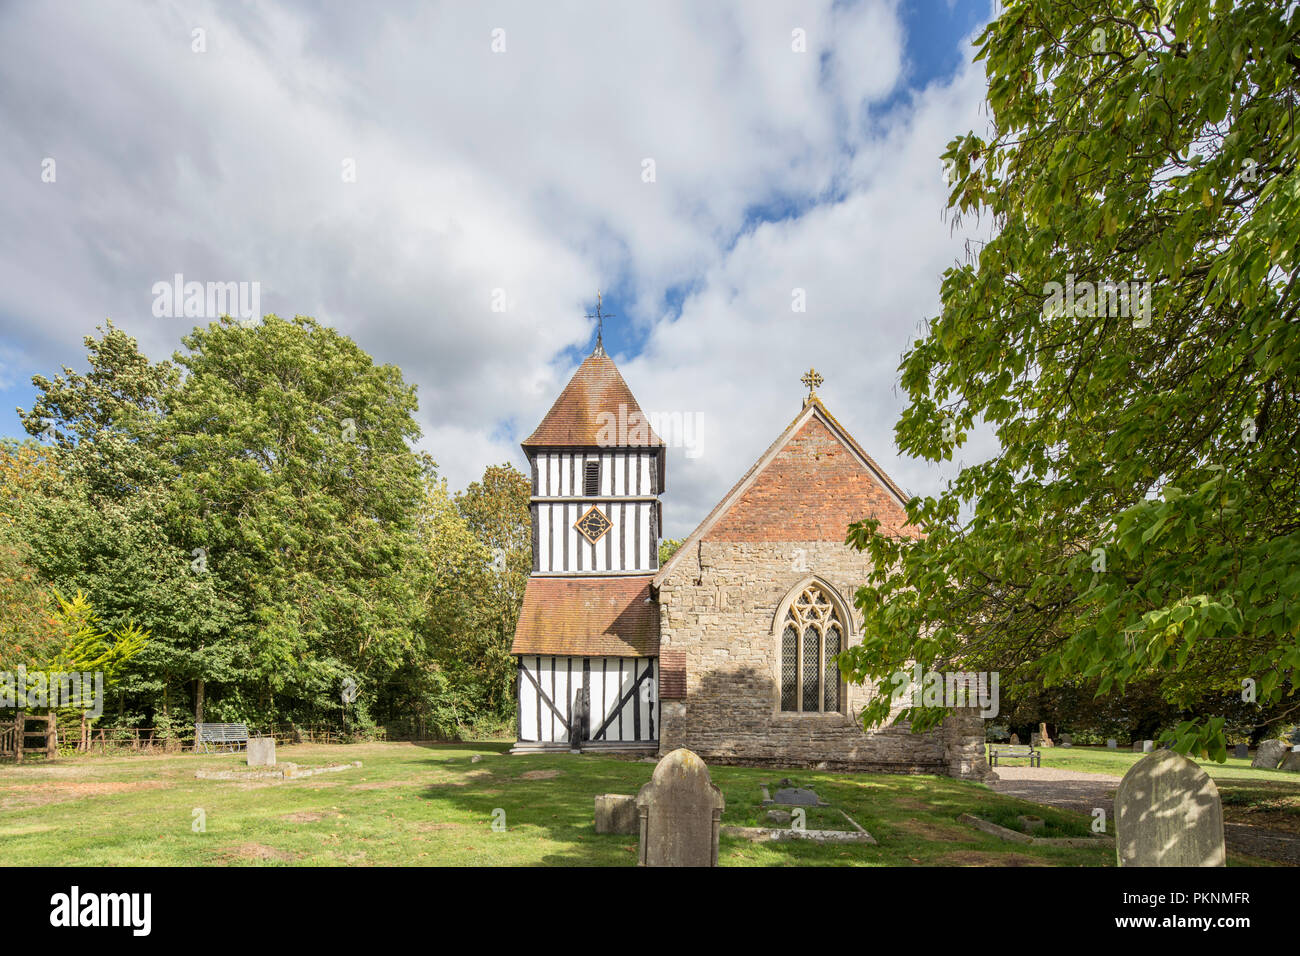 The timber-framed Church of St Peter at Pirton, Worcestershire, England, UK Stock Photo